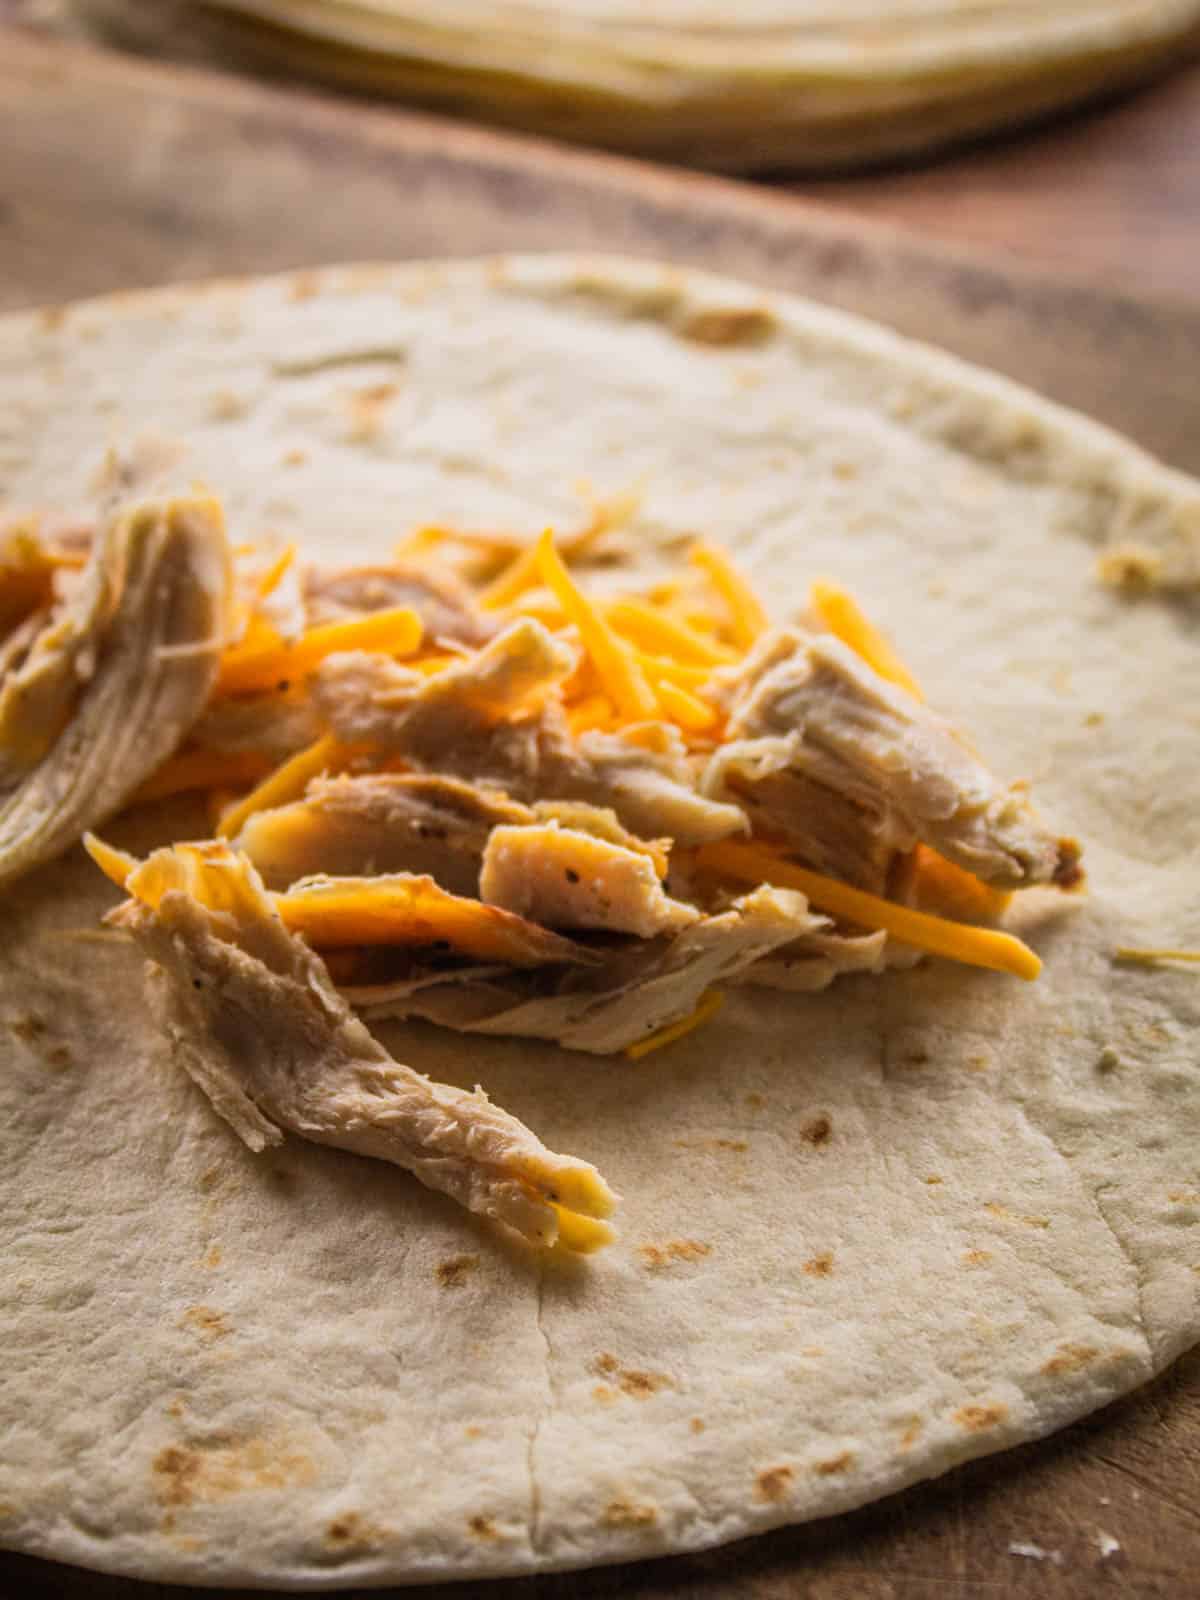 shredded cheese and chicken on a flour tortilla